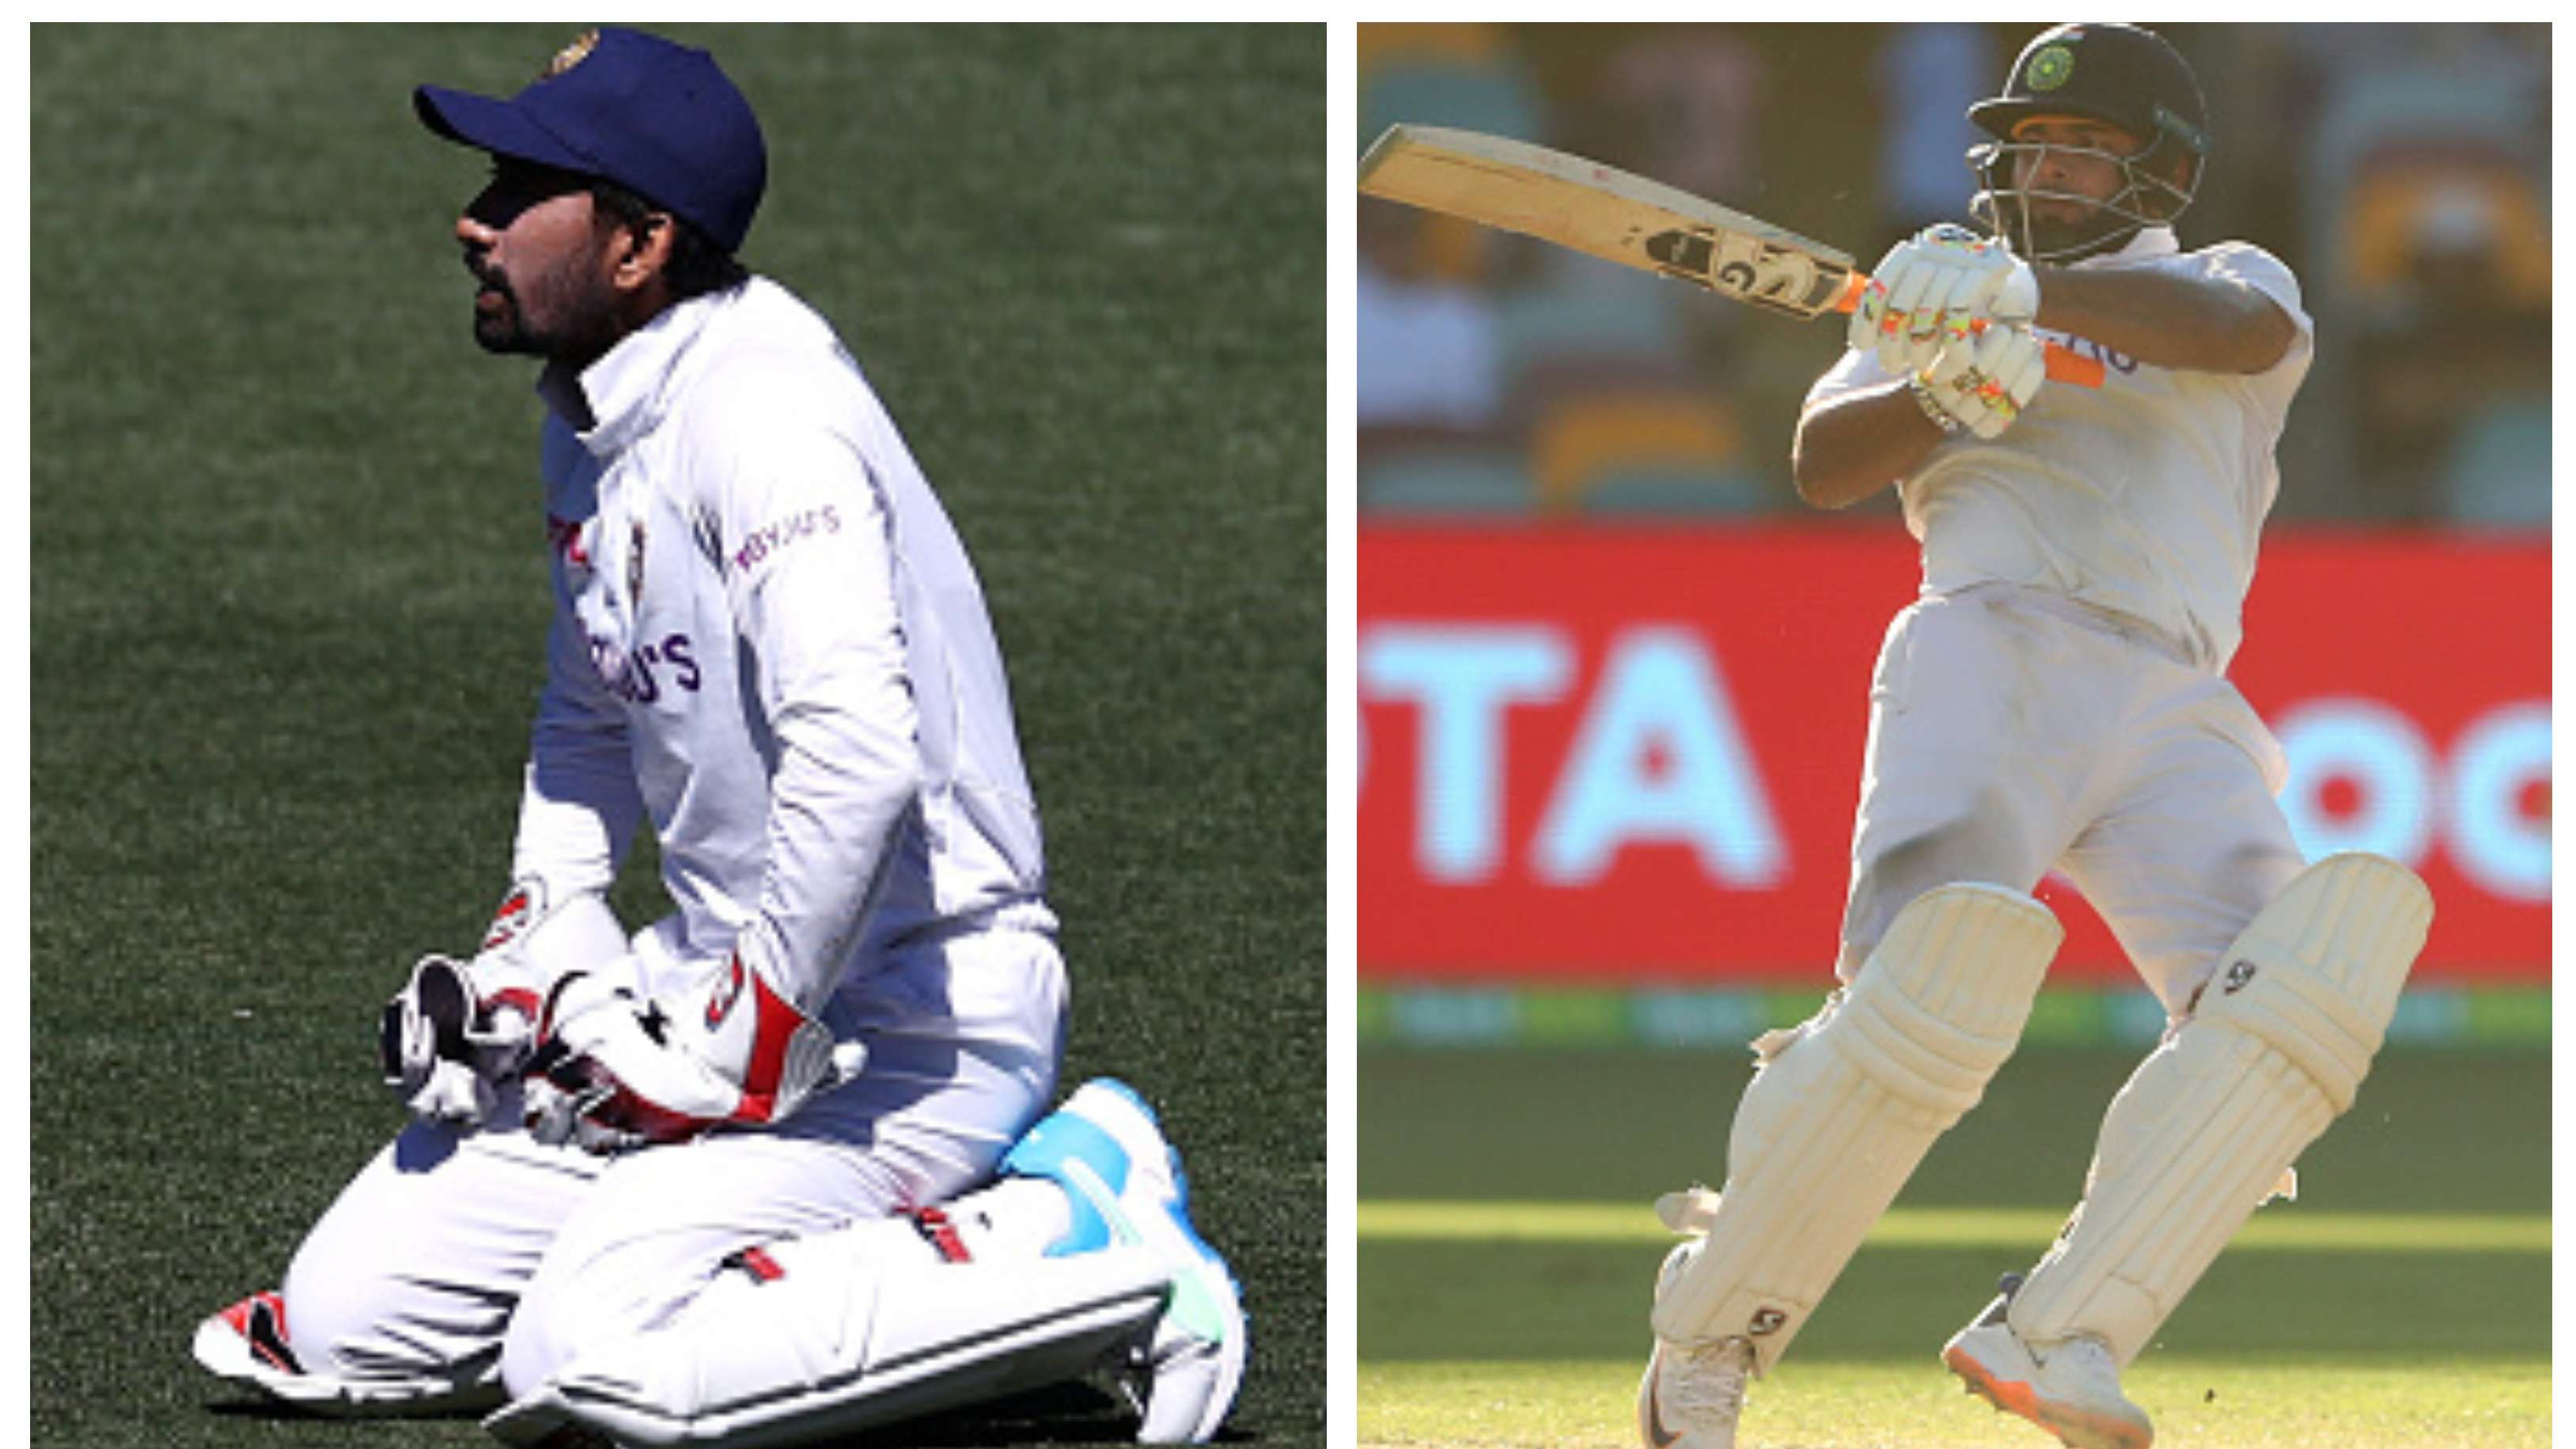 IND v ENG 2021: India may discard specialist wicket-keeper plan after Rishabh Pant's heroics in Australia